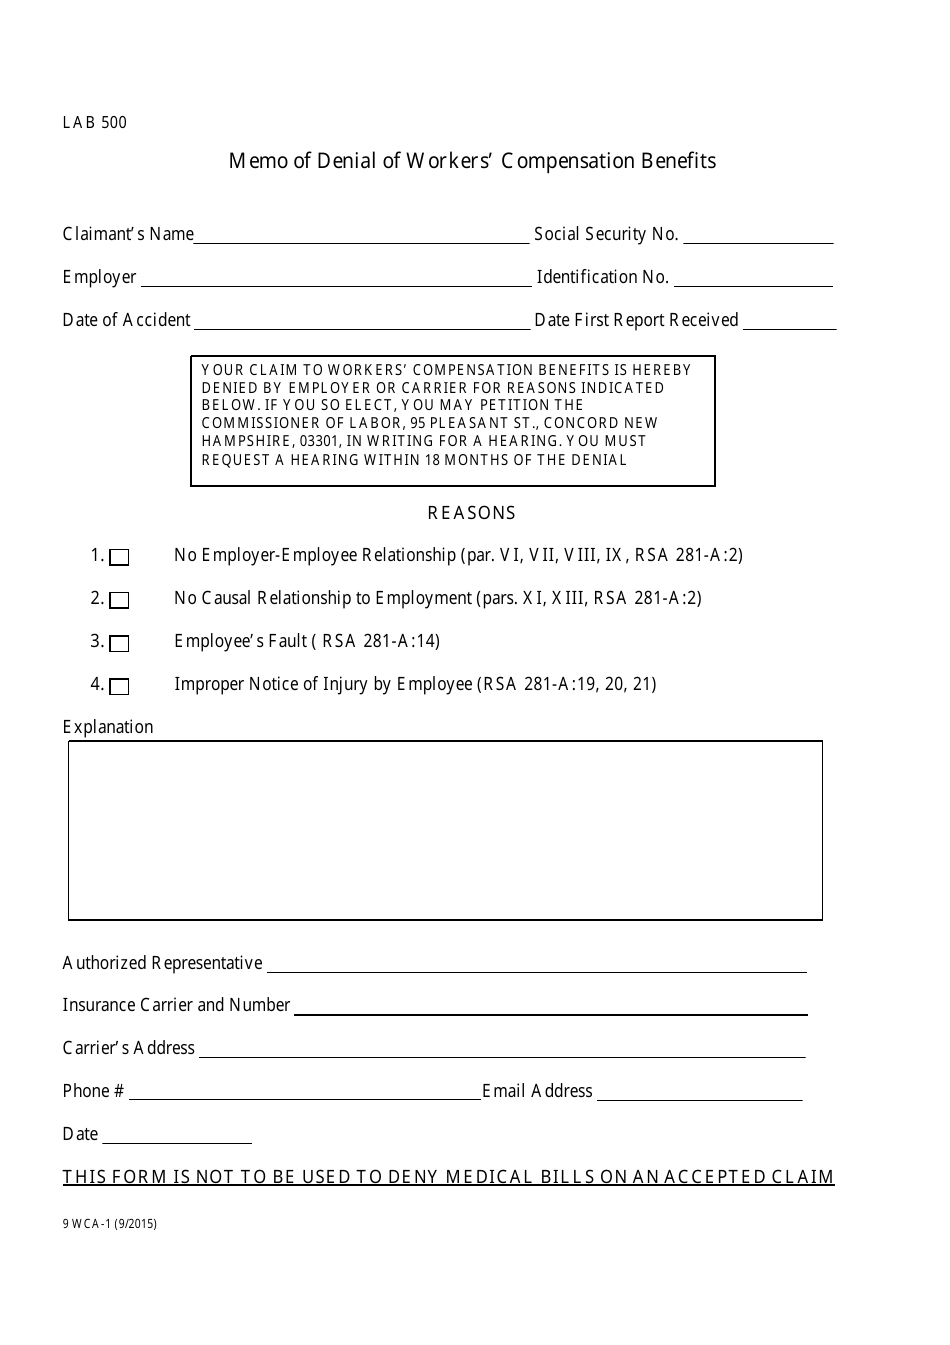 Form 9 WCA-1 Memo of Denial of Workers Compensation Benefits - New Hampshire, Page 1